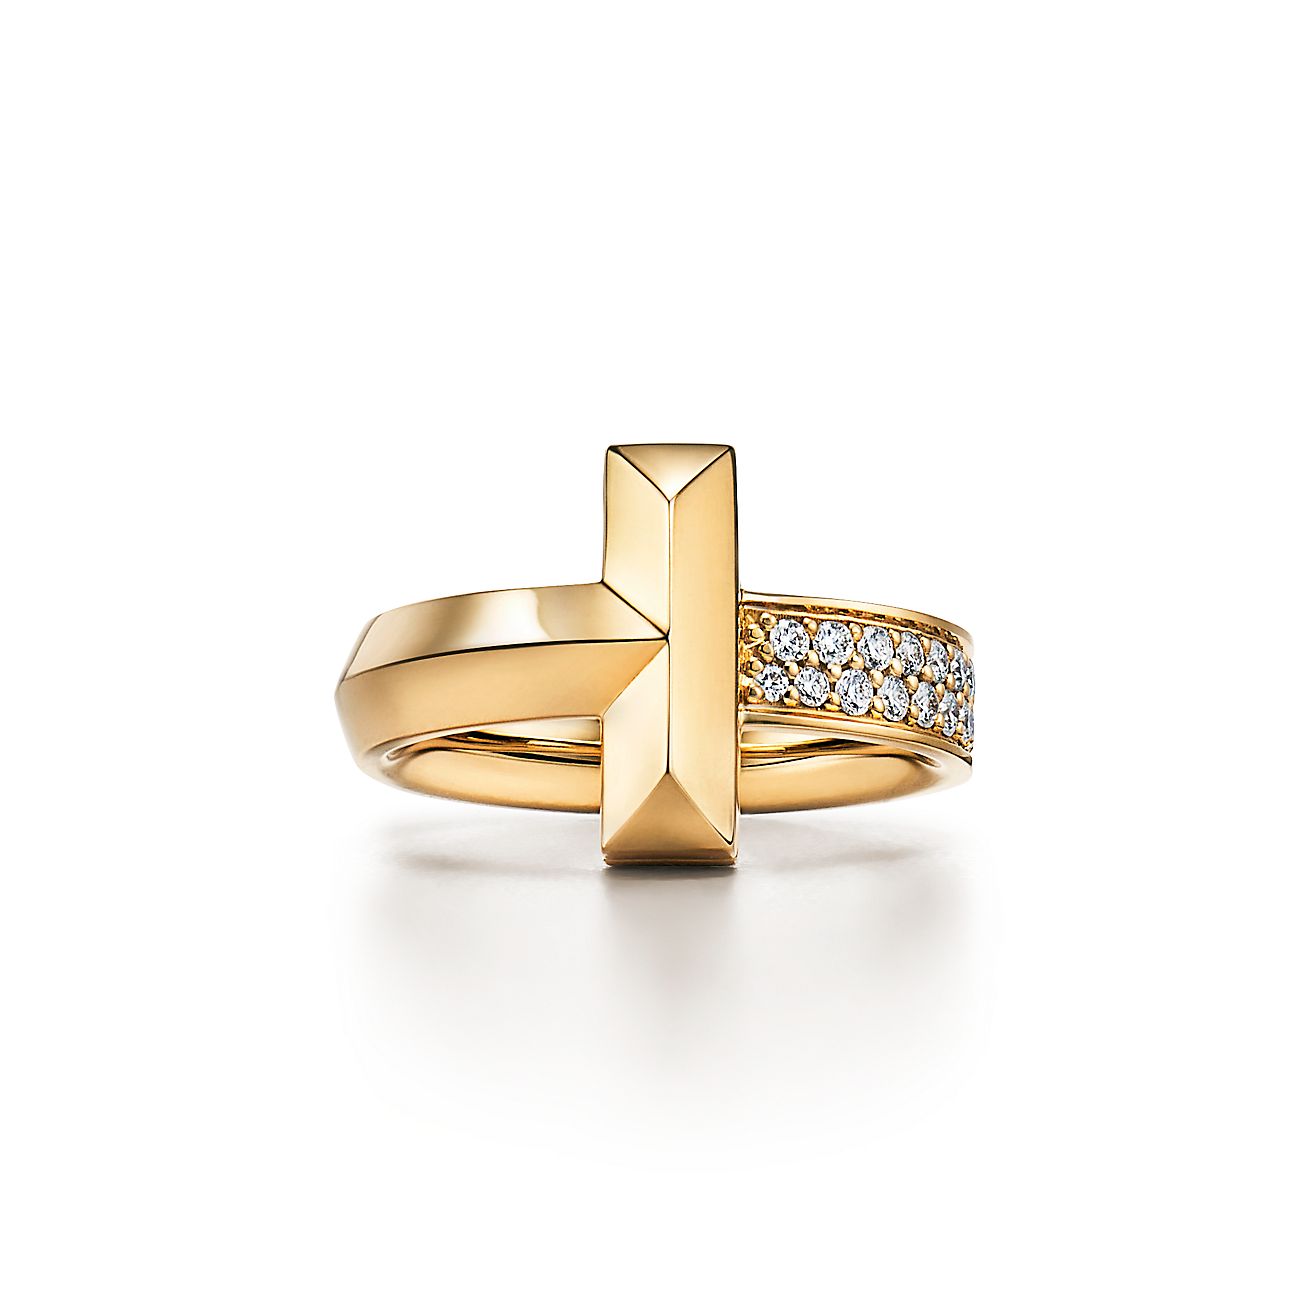 Tiffany T T1 Ring in Yellow Gold with Diamonds, 4.5 mm Wide | Tiffany & Co.